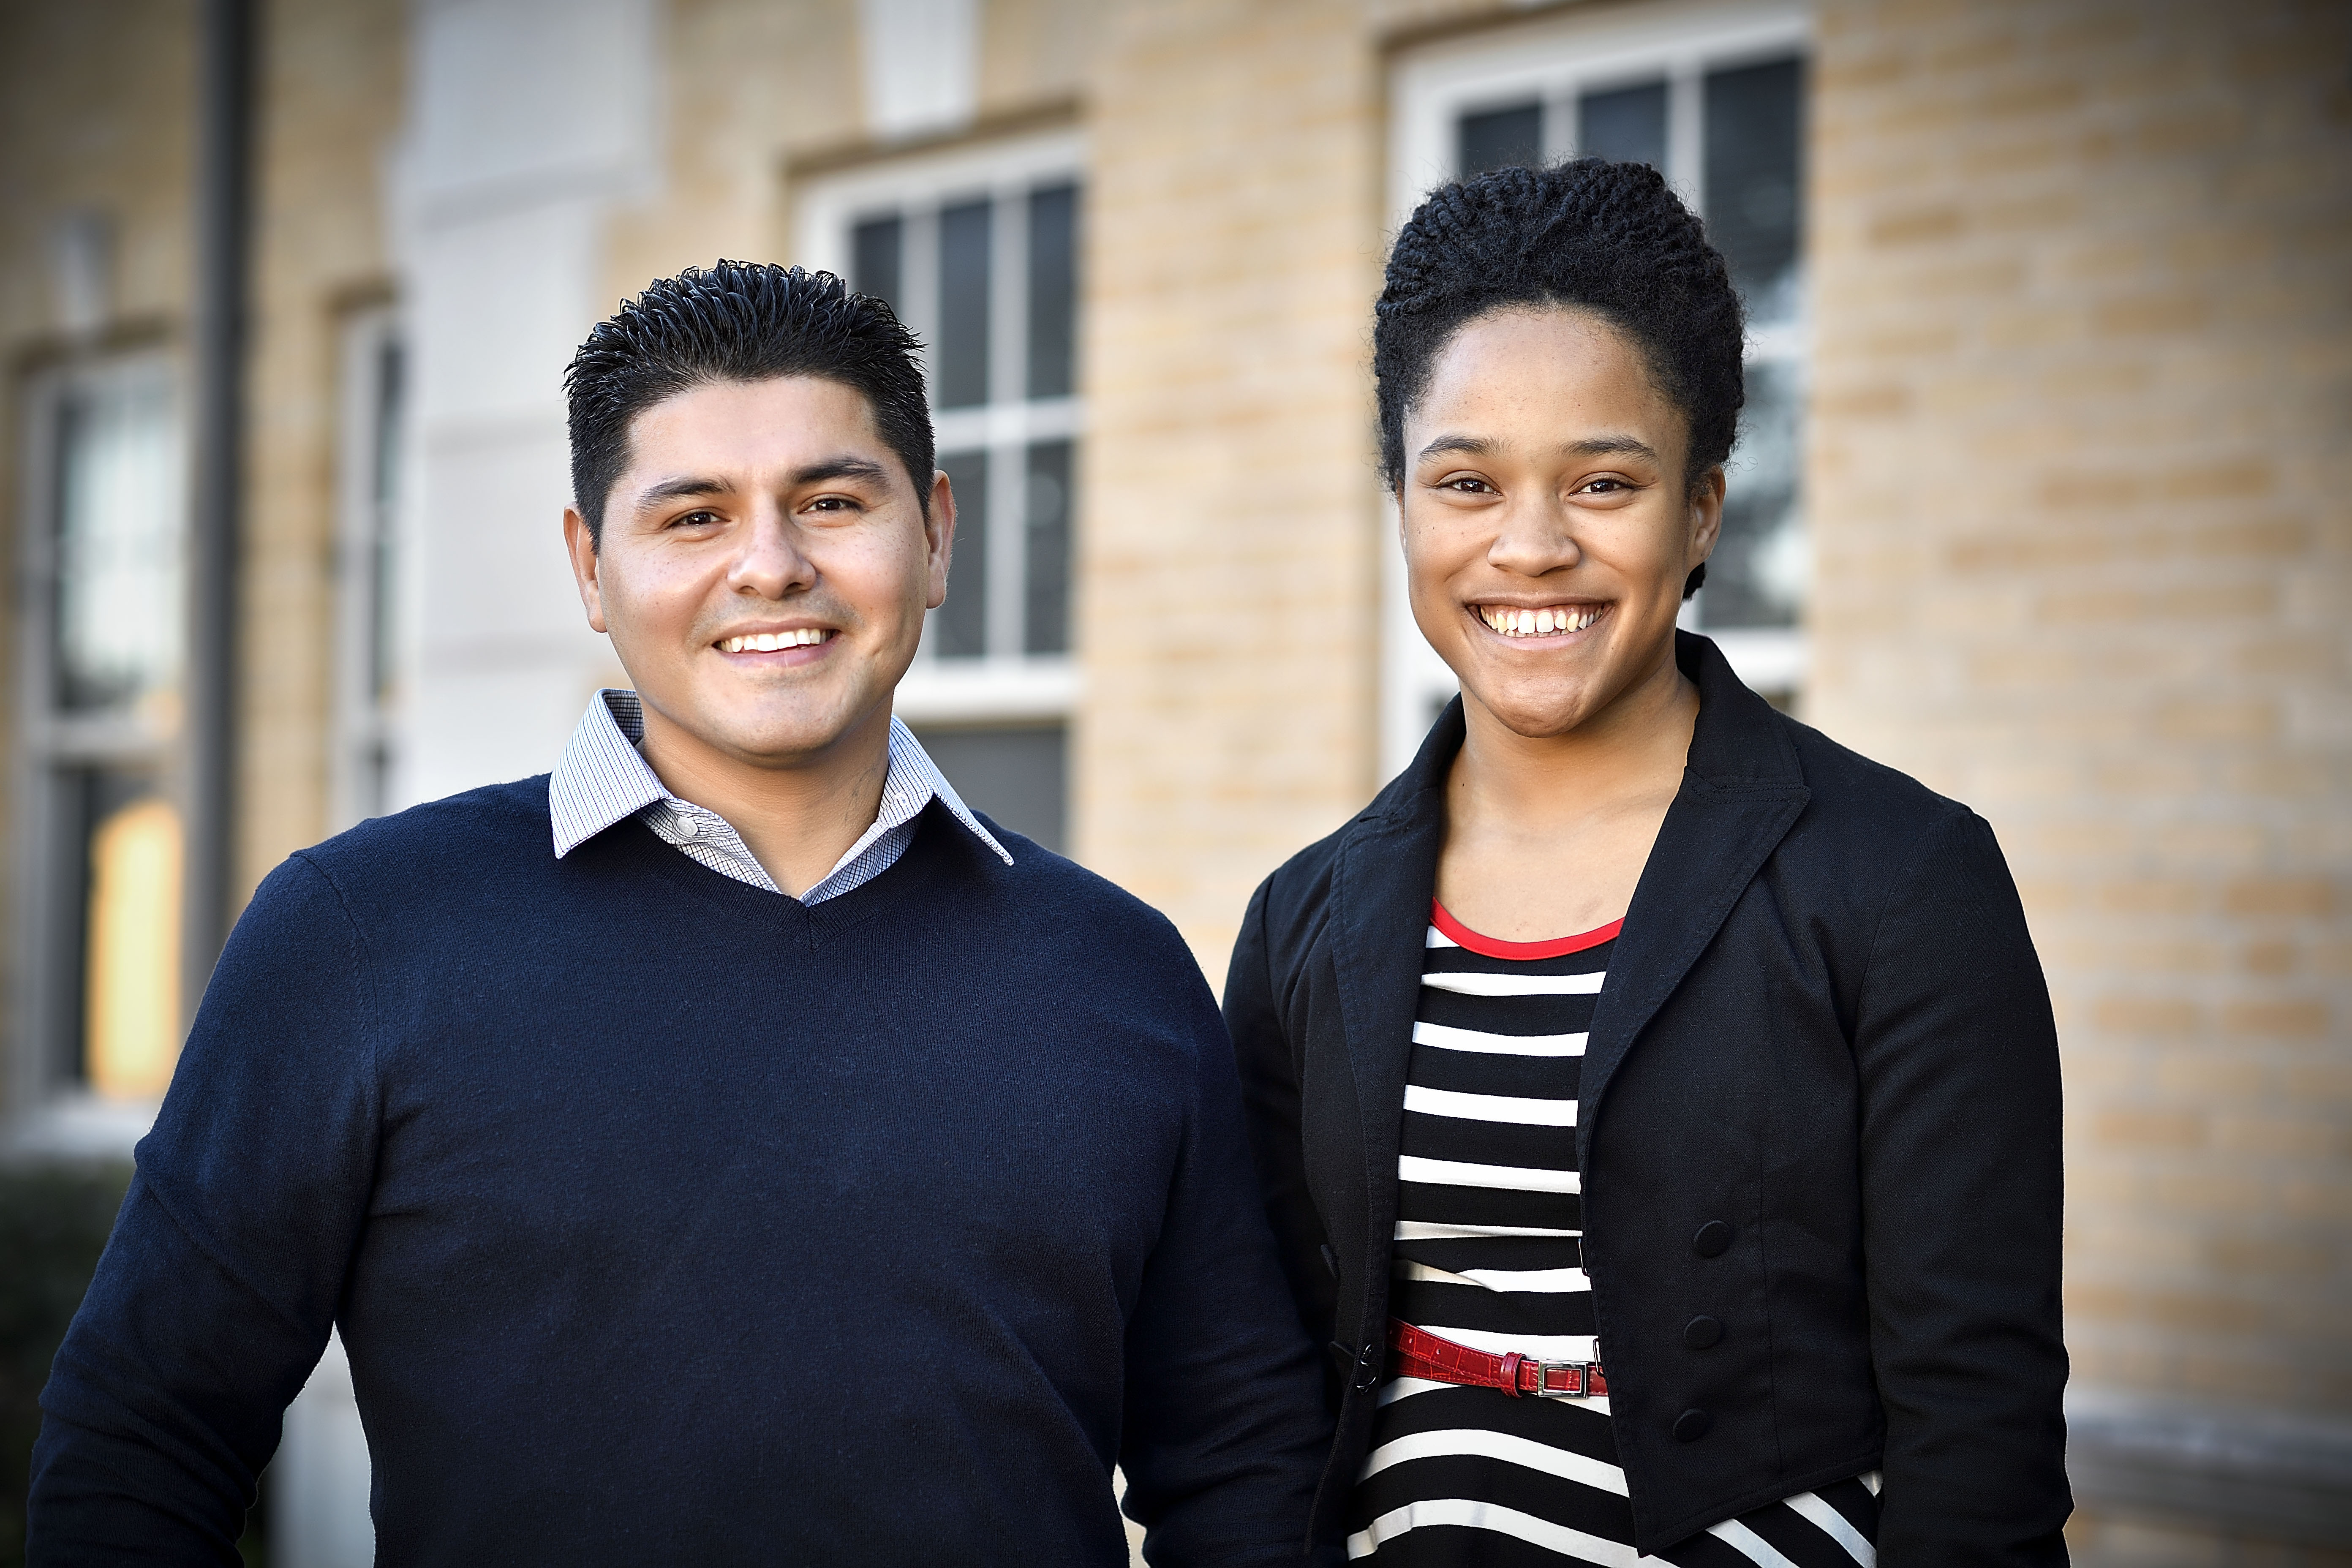 University of North Texas students José Whitten and Kiara Powell both lived in foster homes as children. They’ve found support from other students with similar backgrounds in PUSH, a UNT student organization in which former foster care students mentor children currently in the child welfare system.